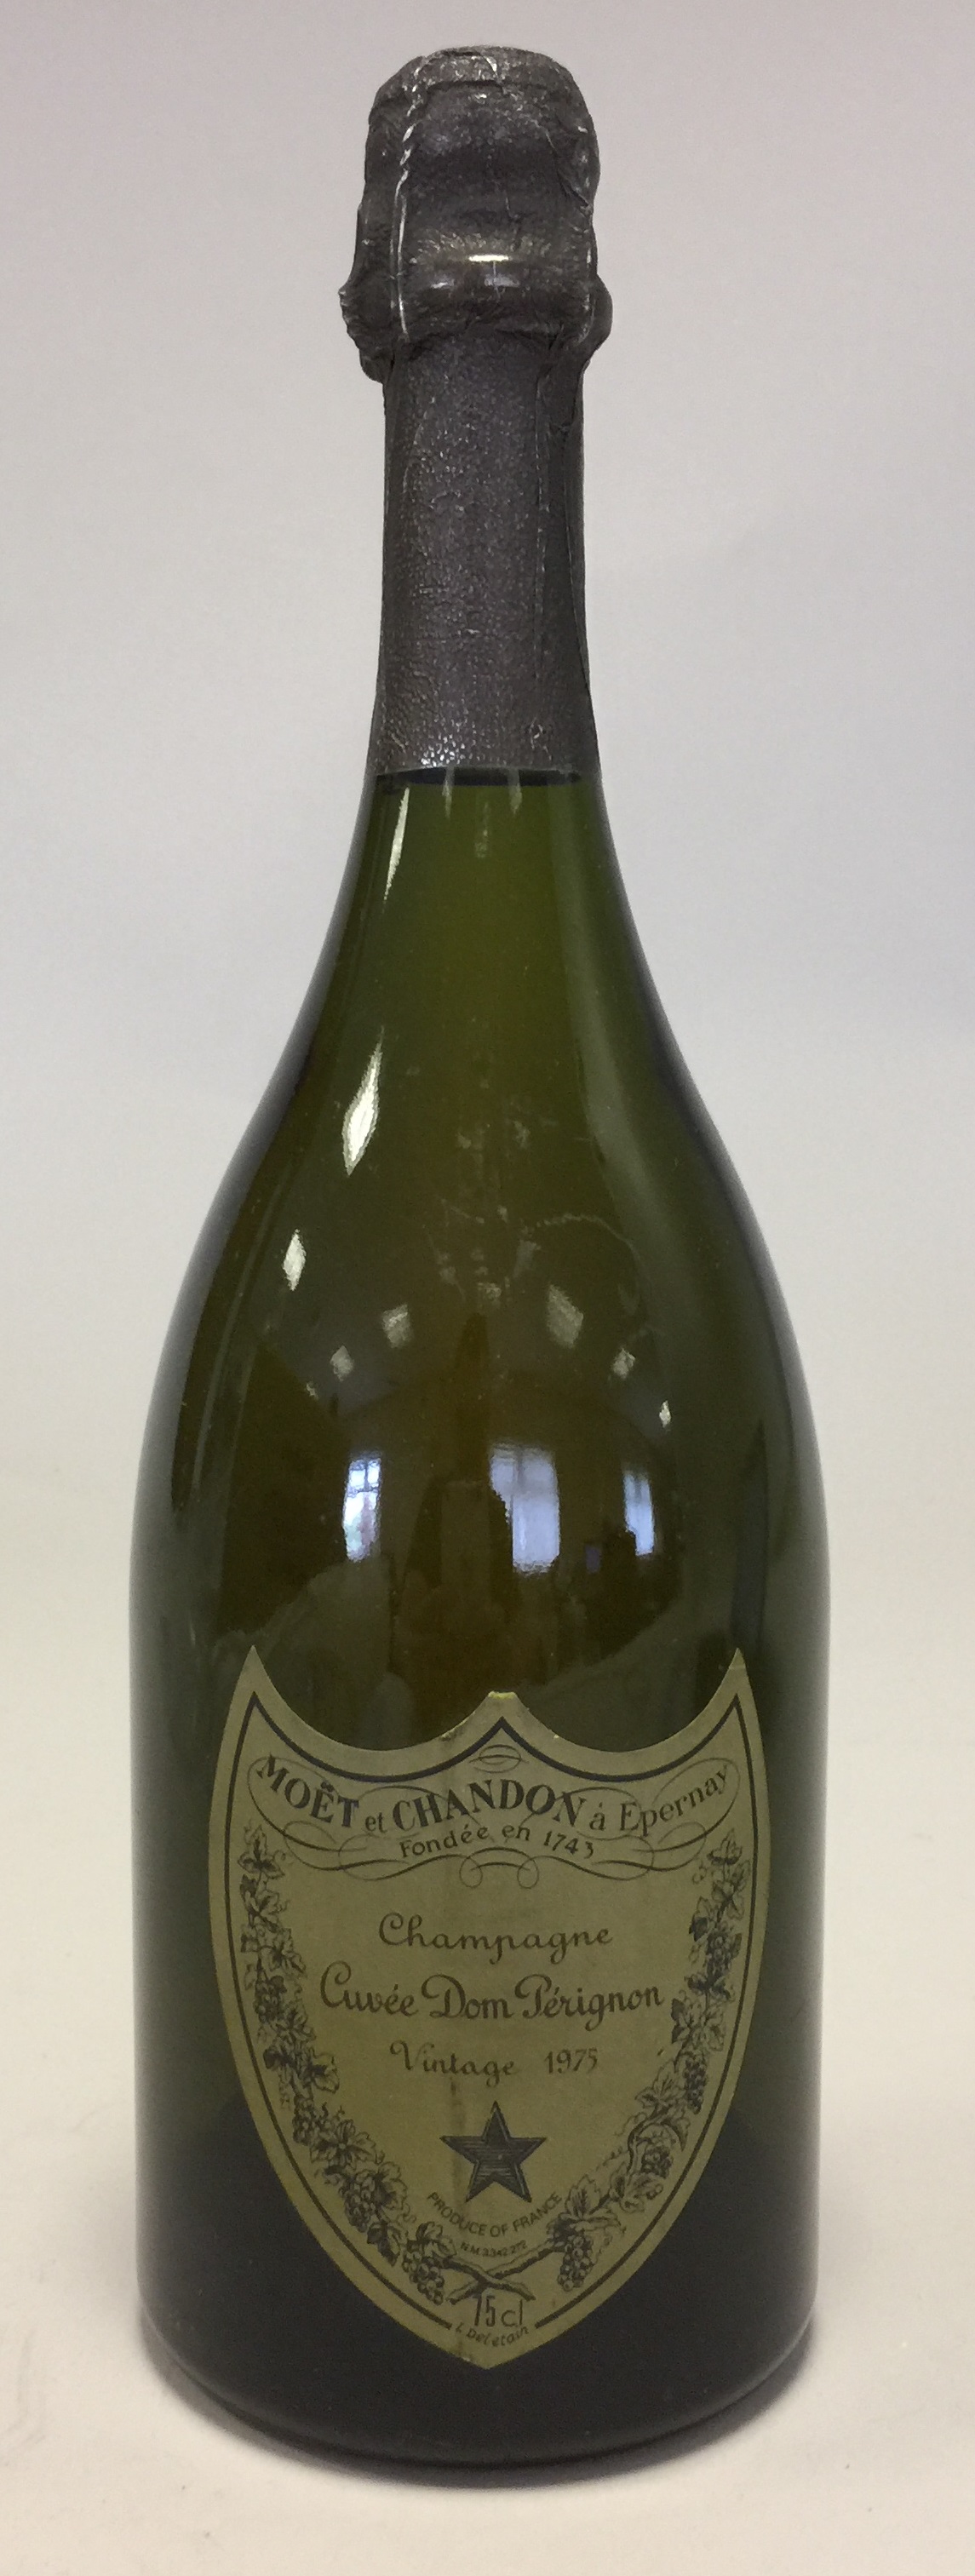 MOET AND CHANDON DOM PERIGNON 1975. A 75cl bottle of Moet et Chandon Cuvee Dom Perignon 1975. - Bild 2 aus 3